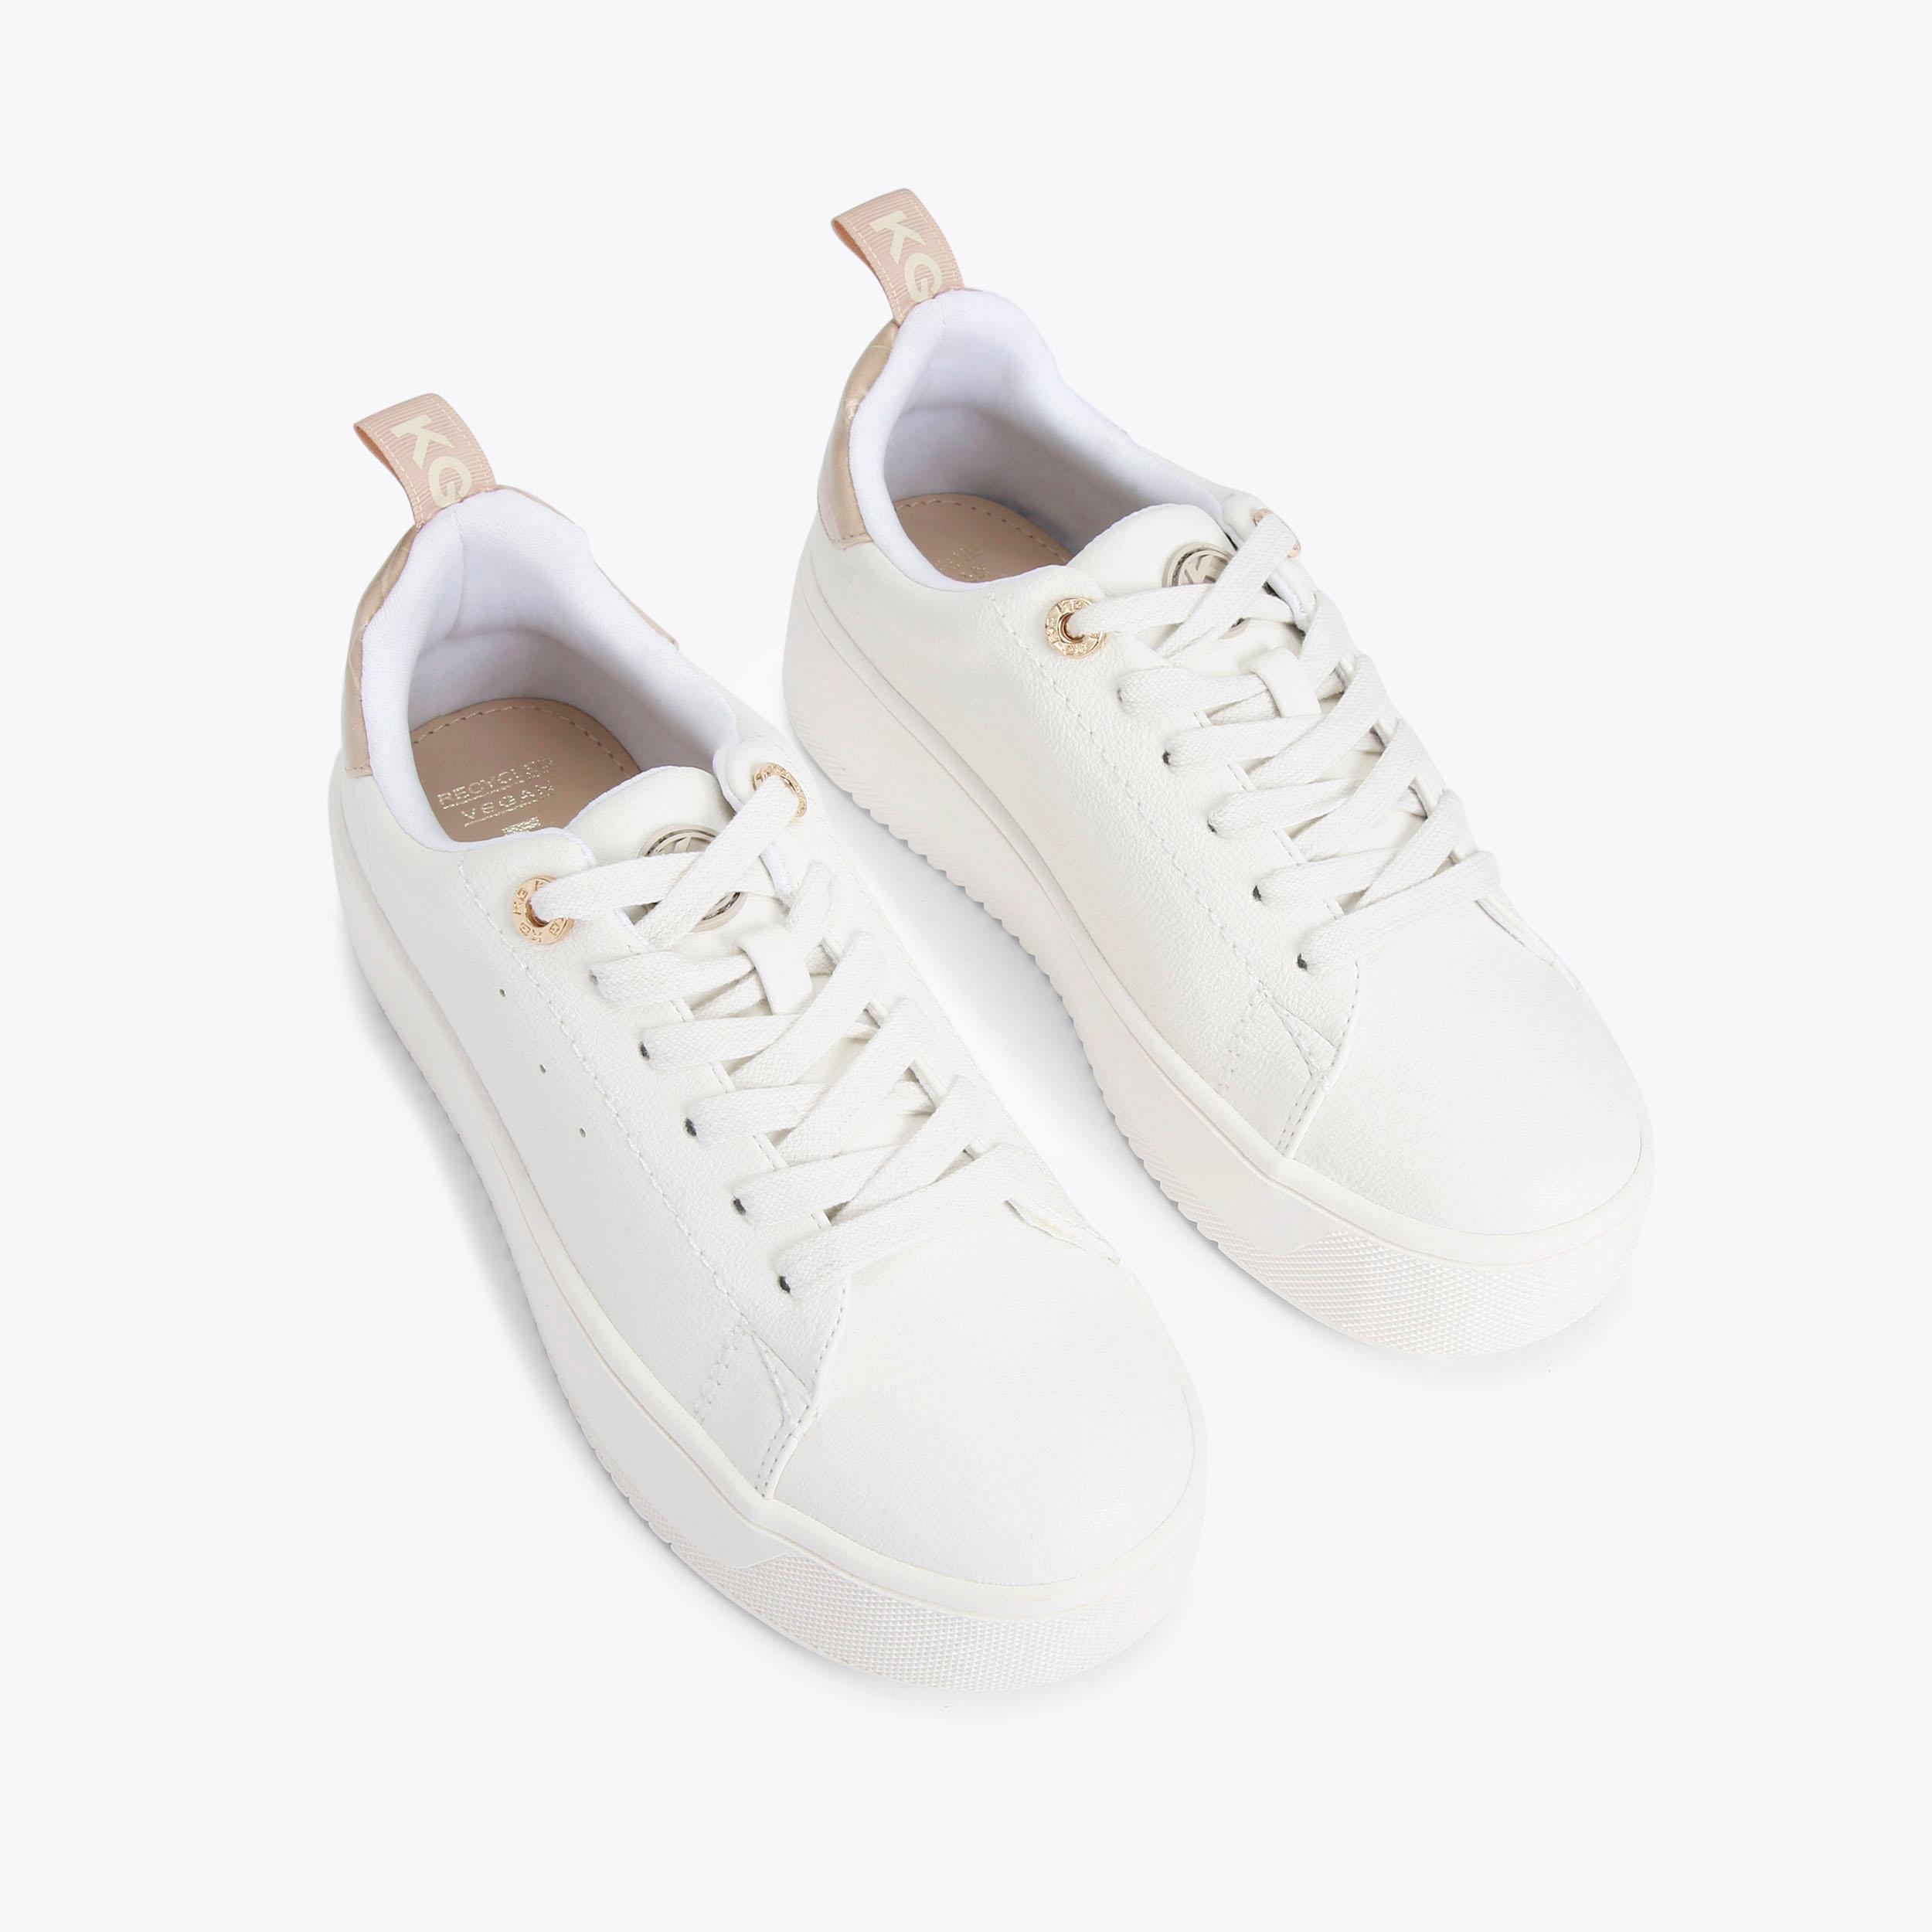 LIGHTER LACE UP White Vegan Chunky Sneakers by KG KURT GEIGER